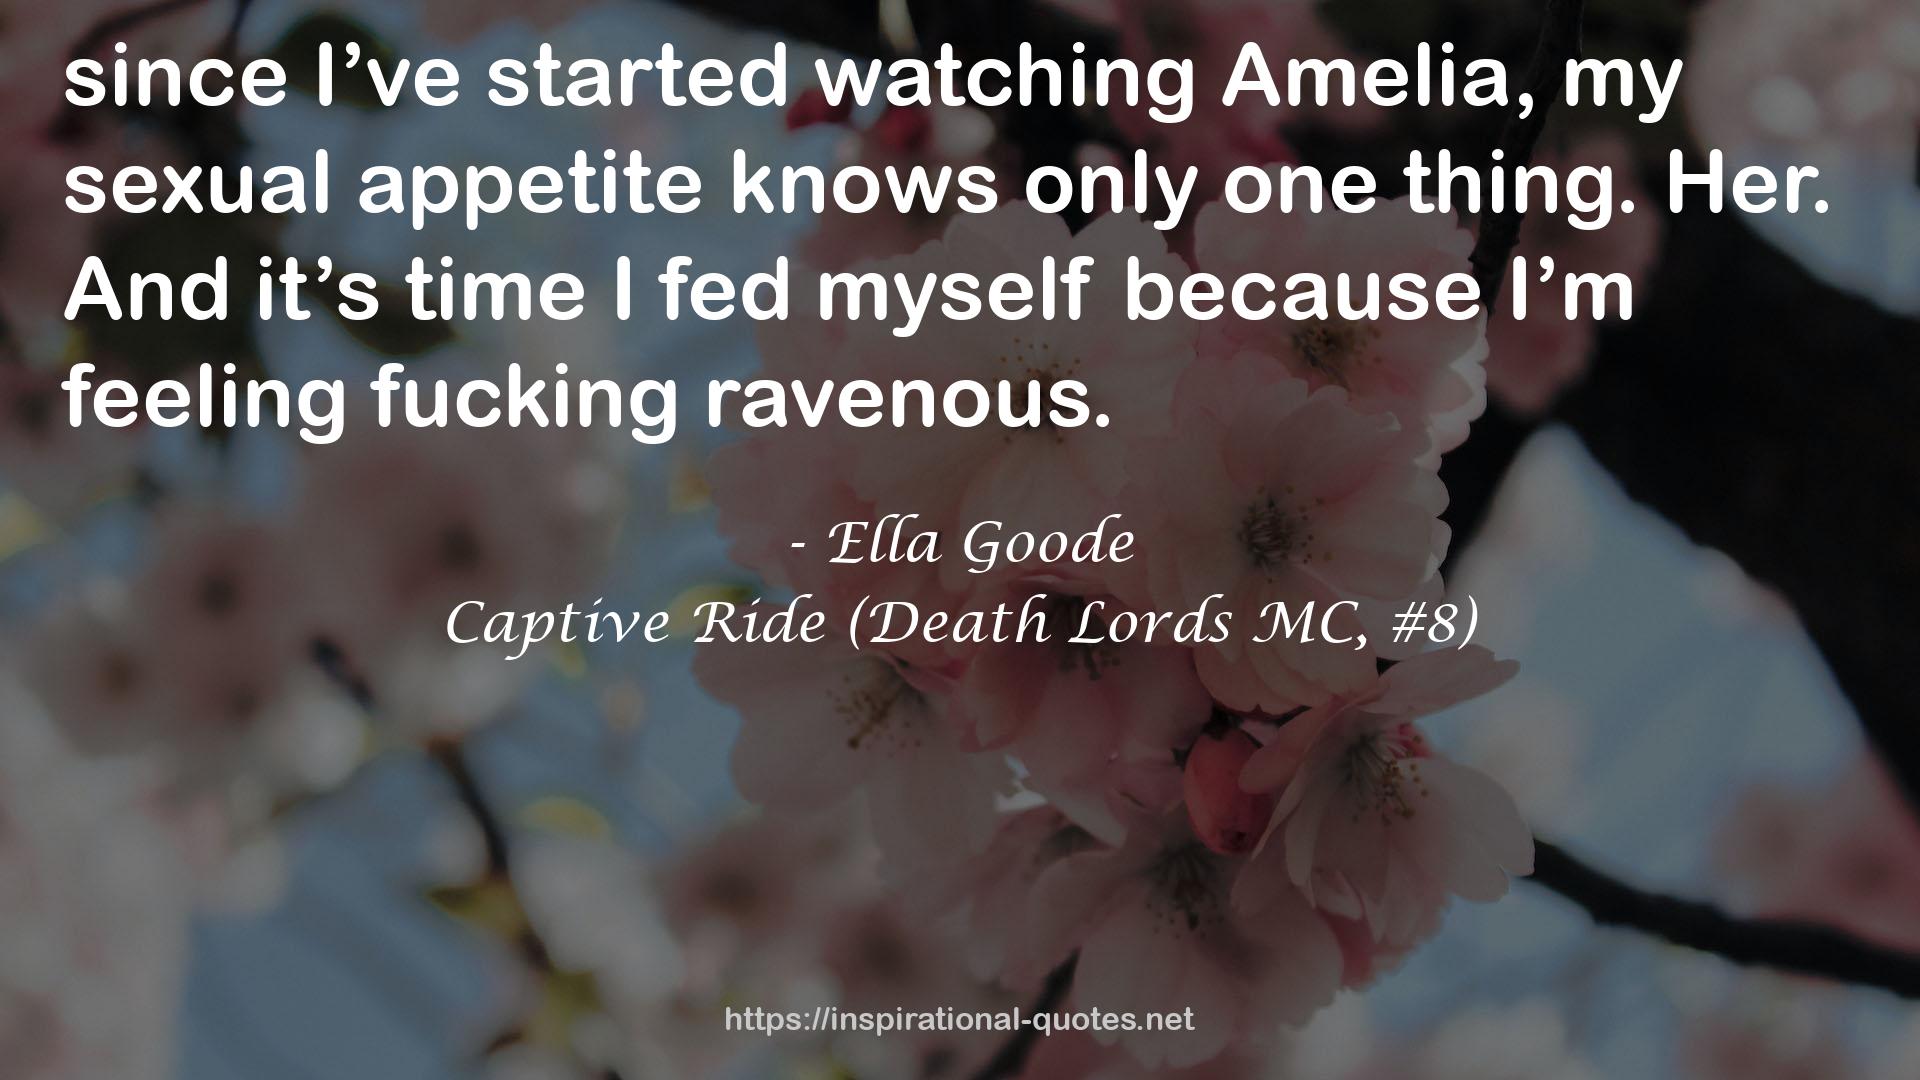 Captive Ride (Death Lords MC, #8) QUOTES